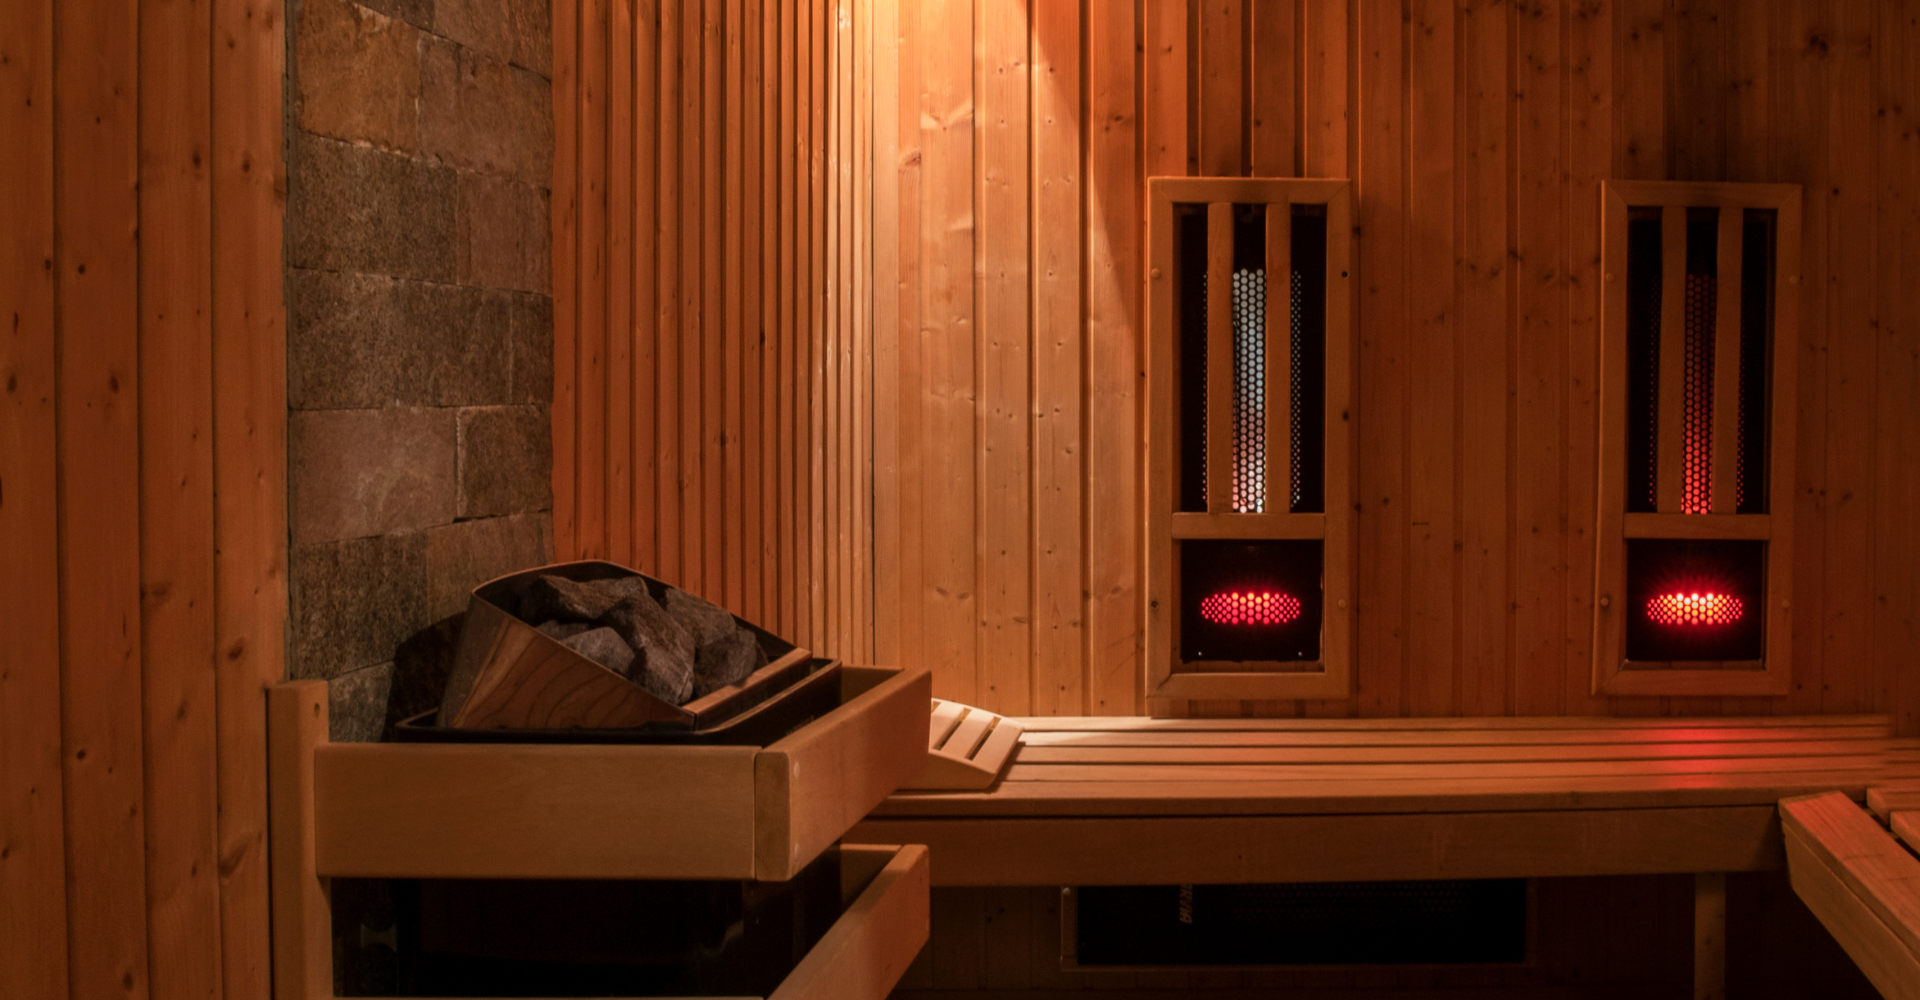 What's Safe With a Chemo Port? Infrared Sauna, Swimming, Steam Room?